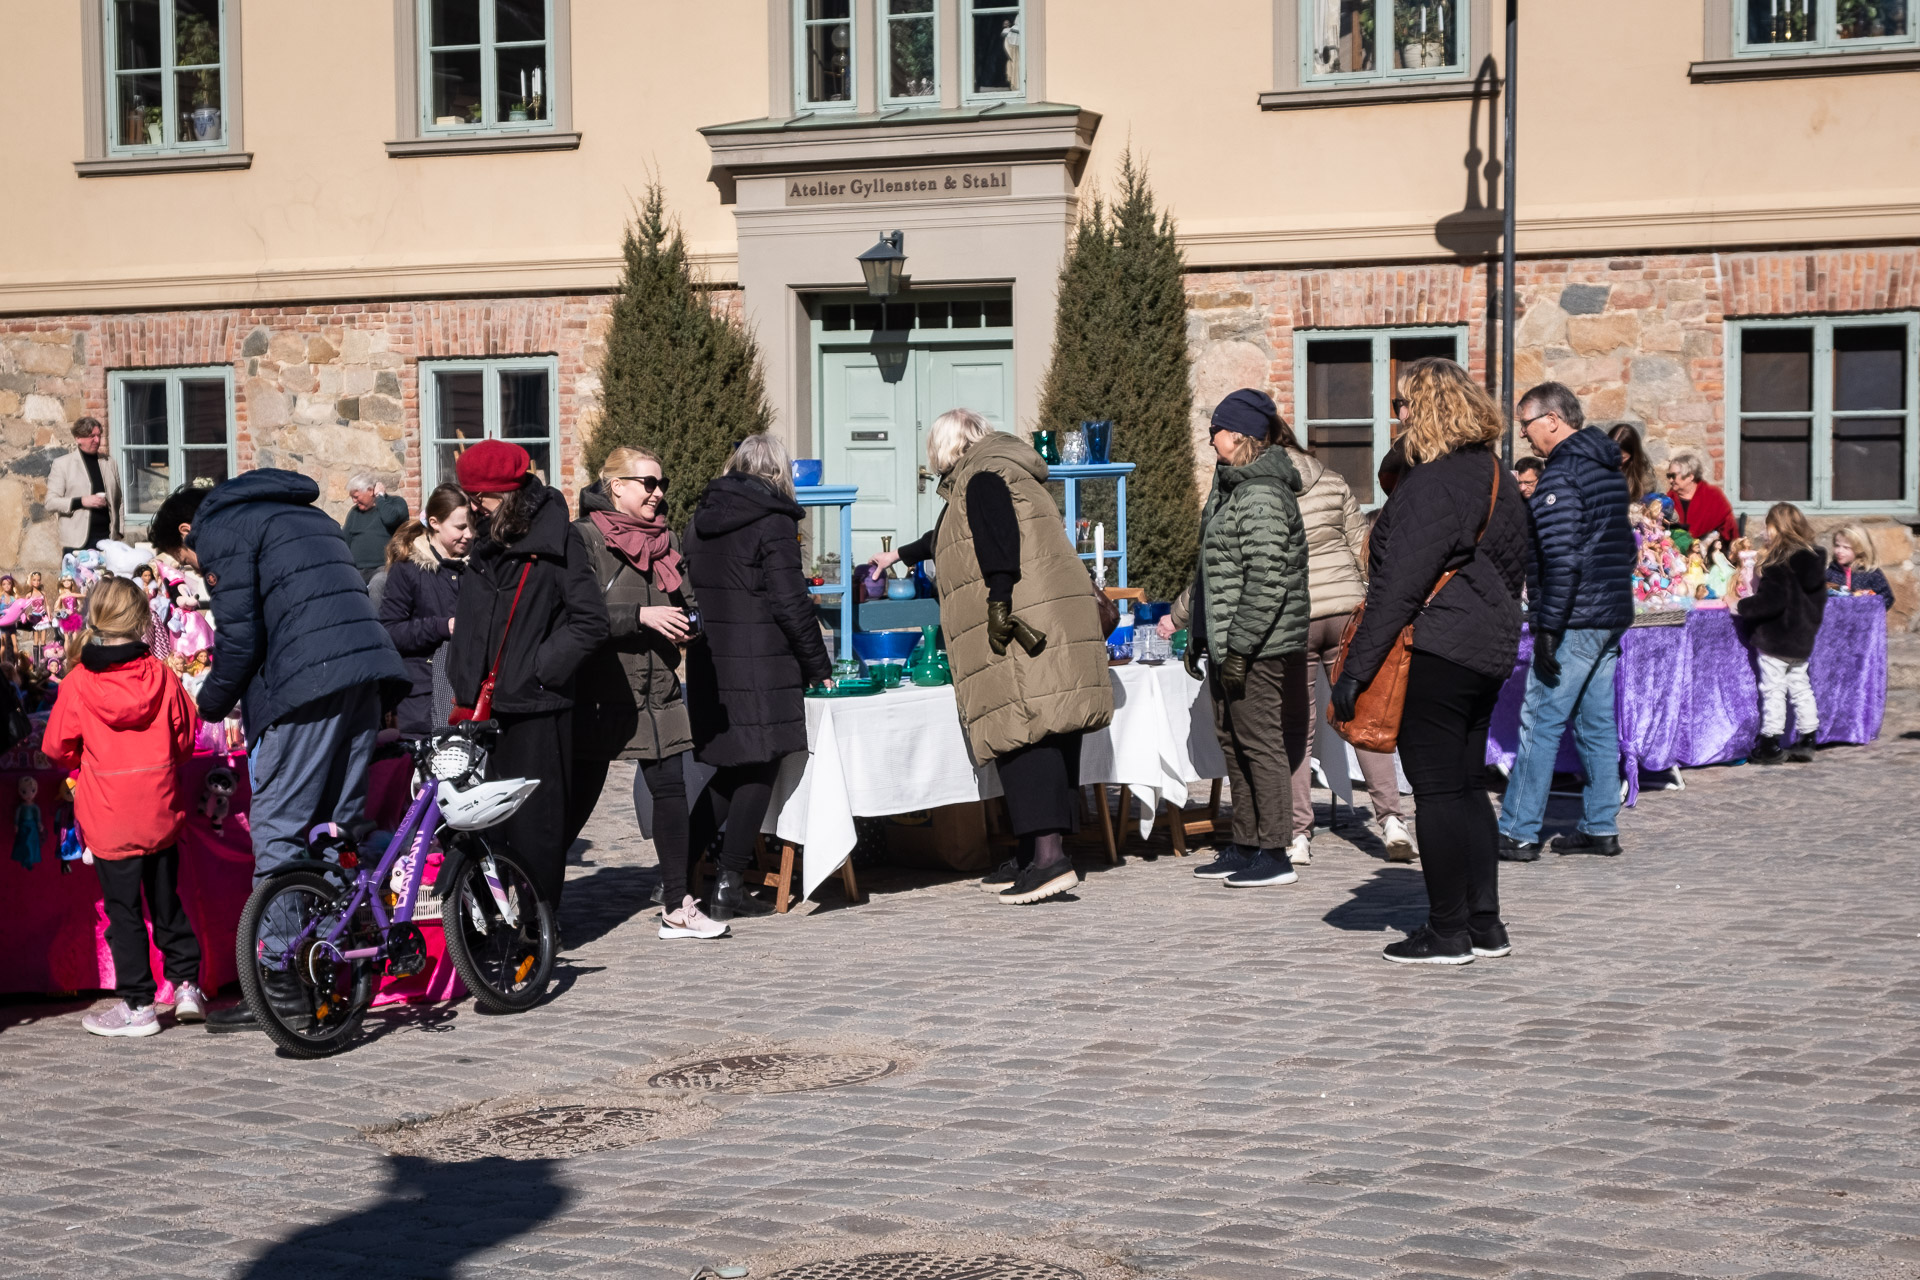 people looking at stuff at the market in the old part of fredrikstad